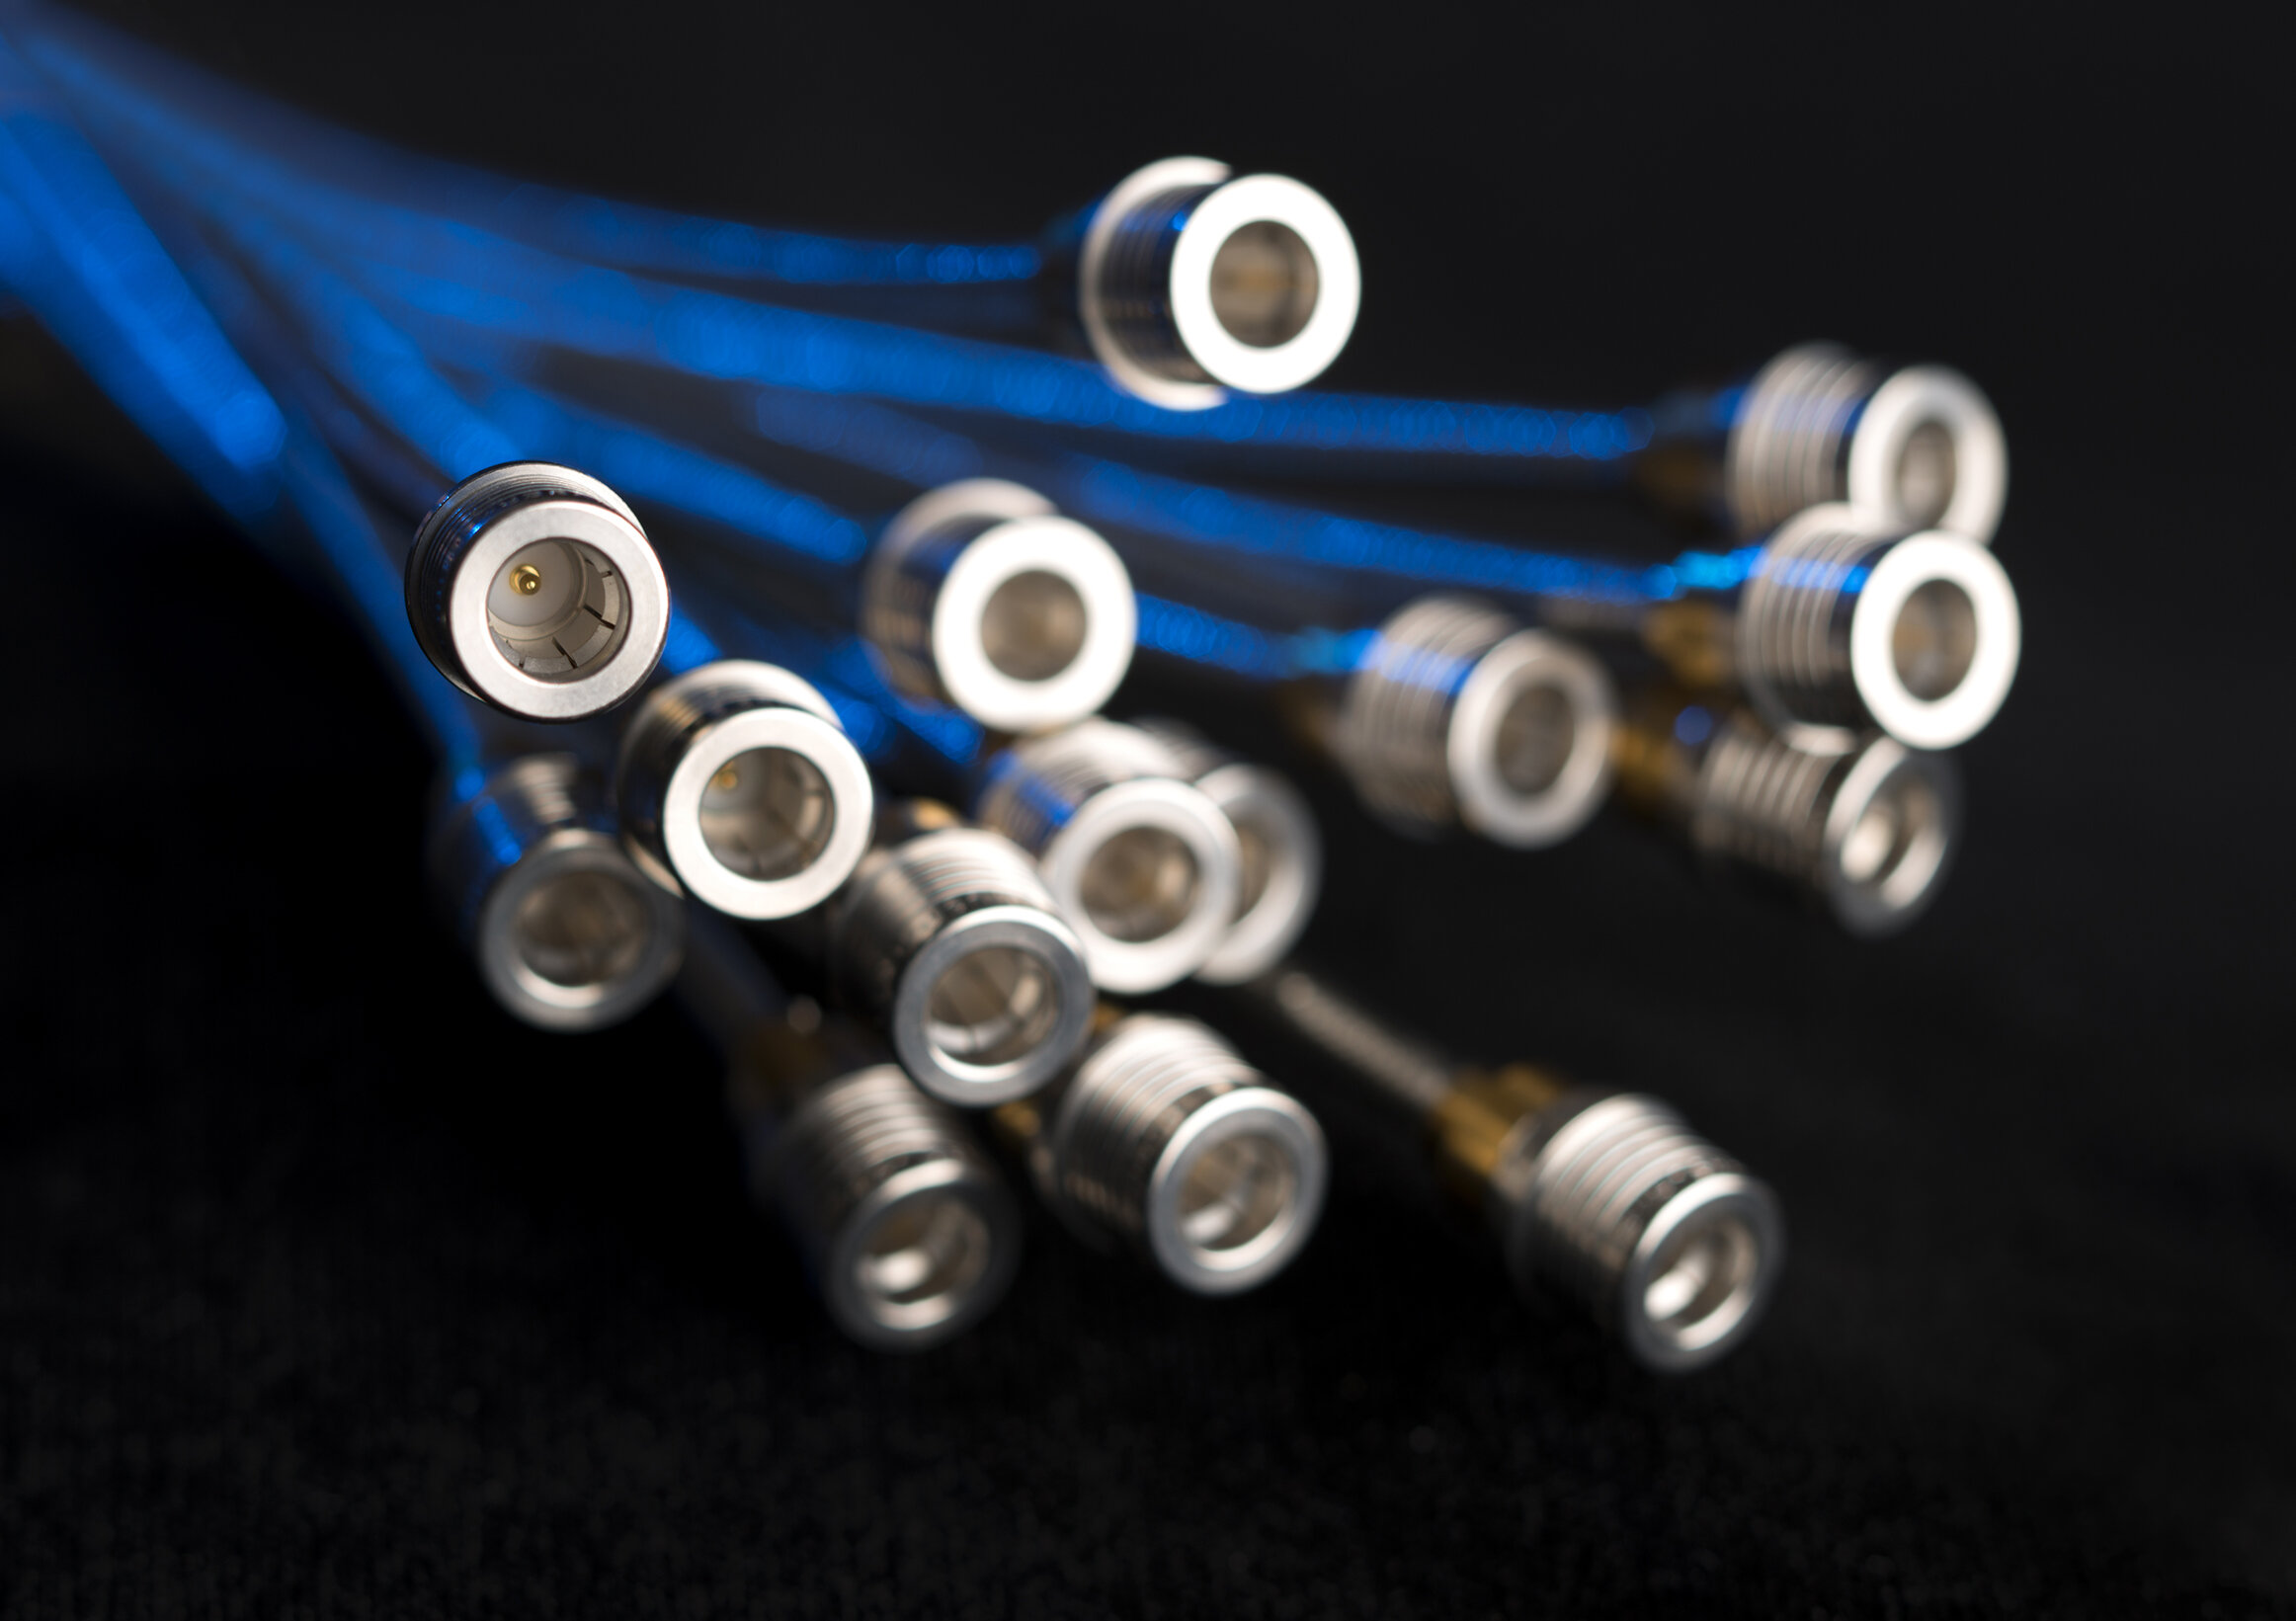 cables-michael-haines-photography.jpg